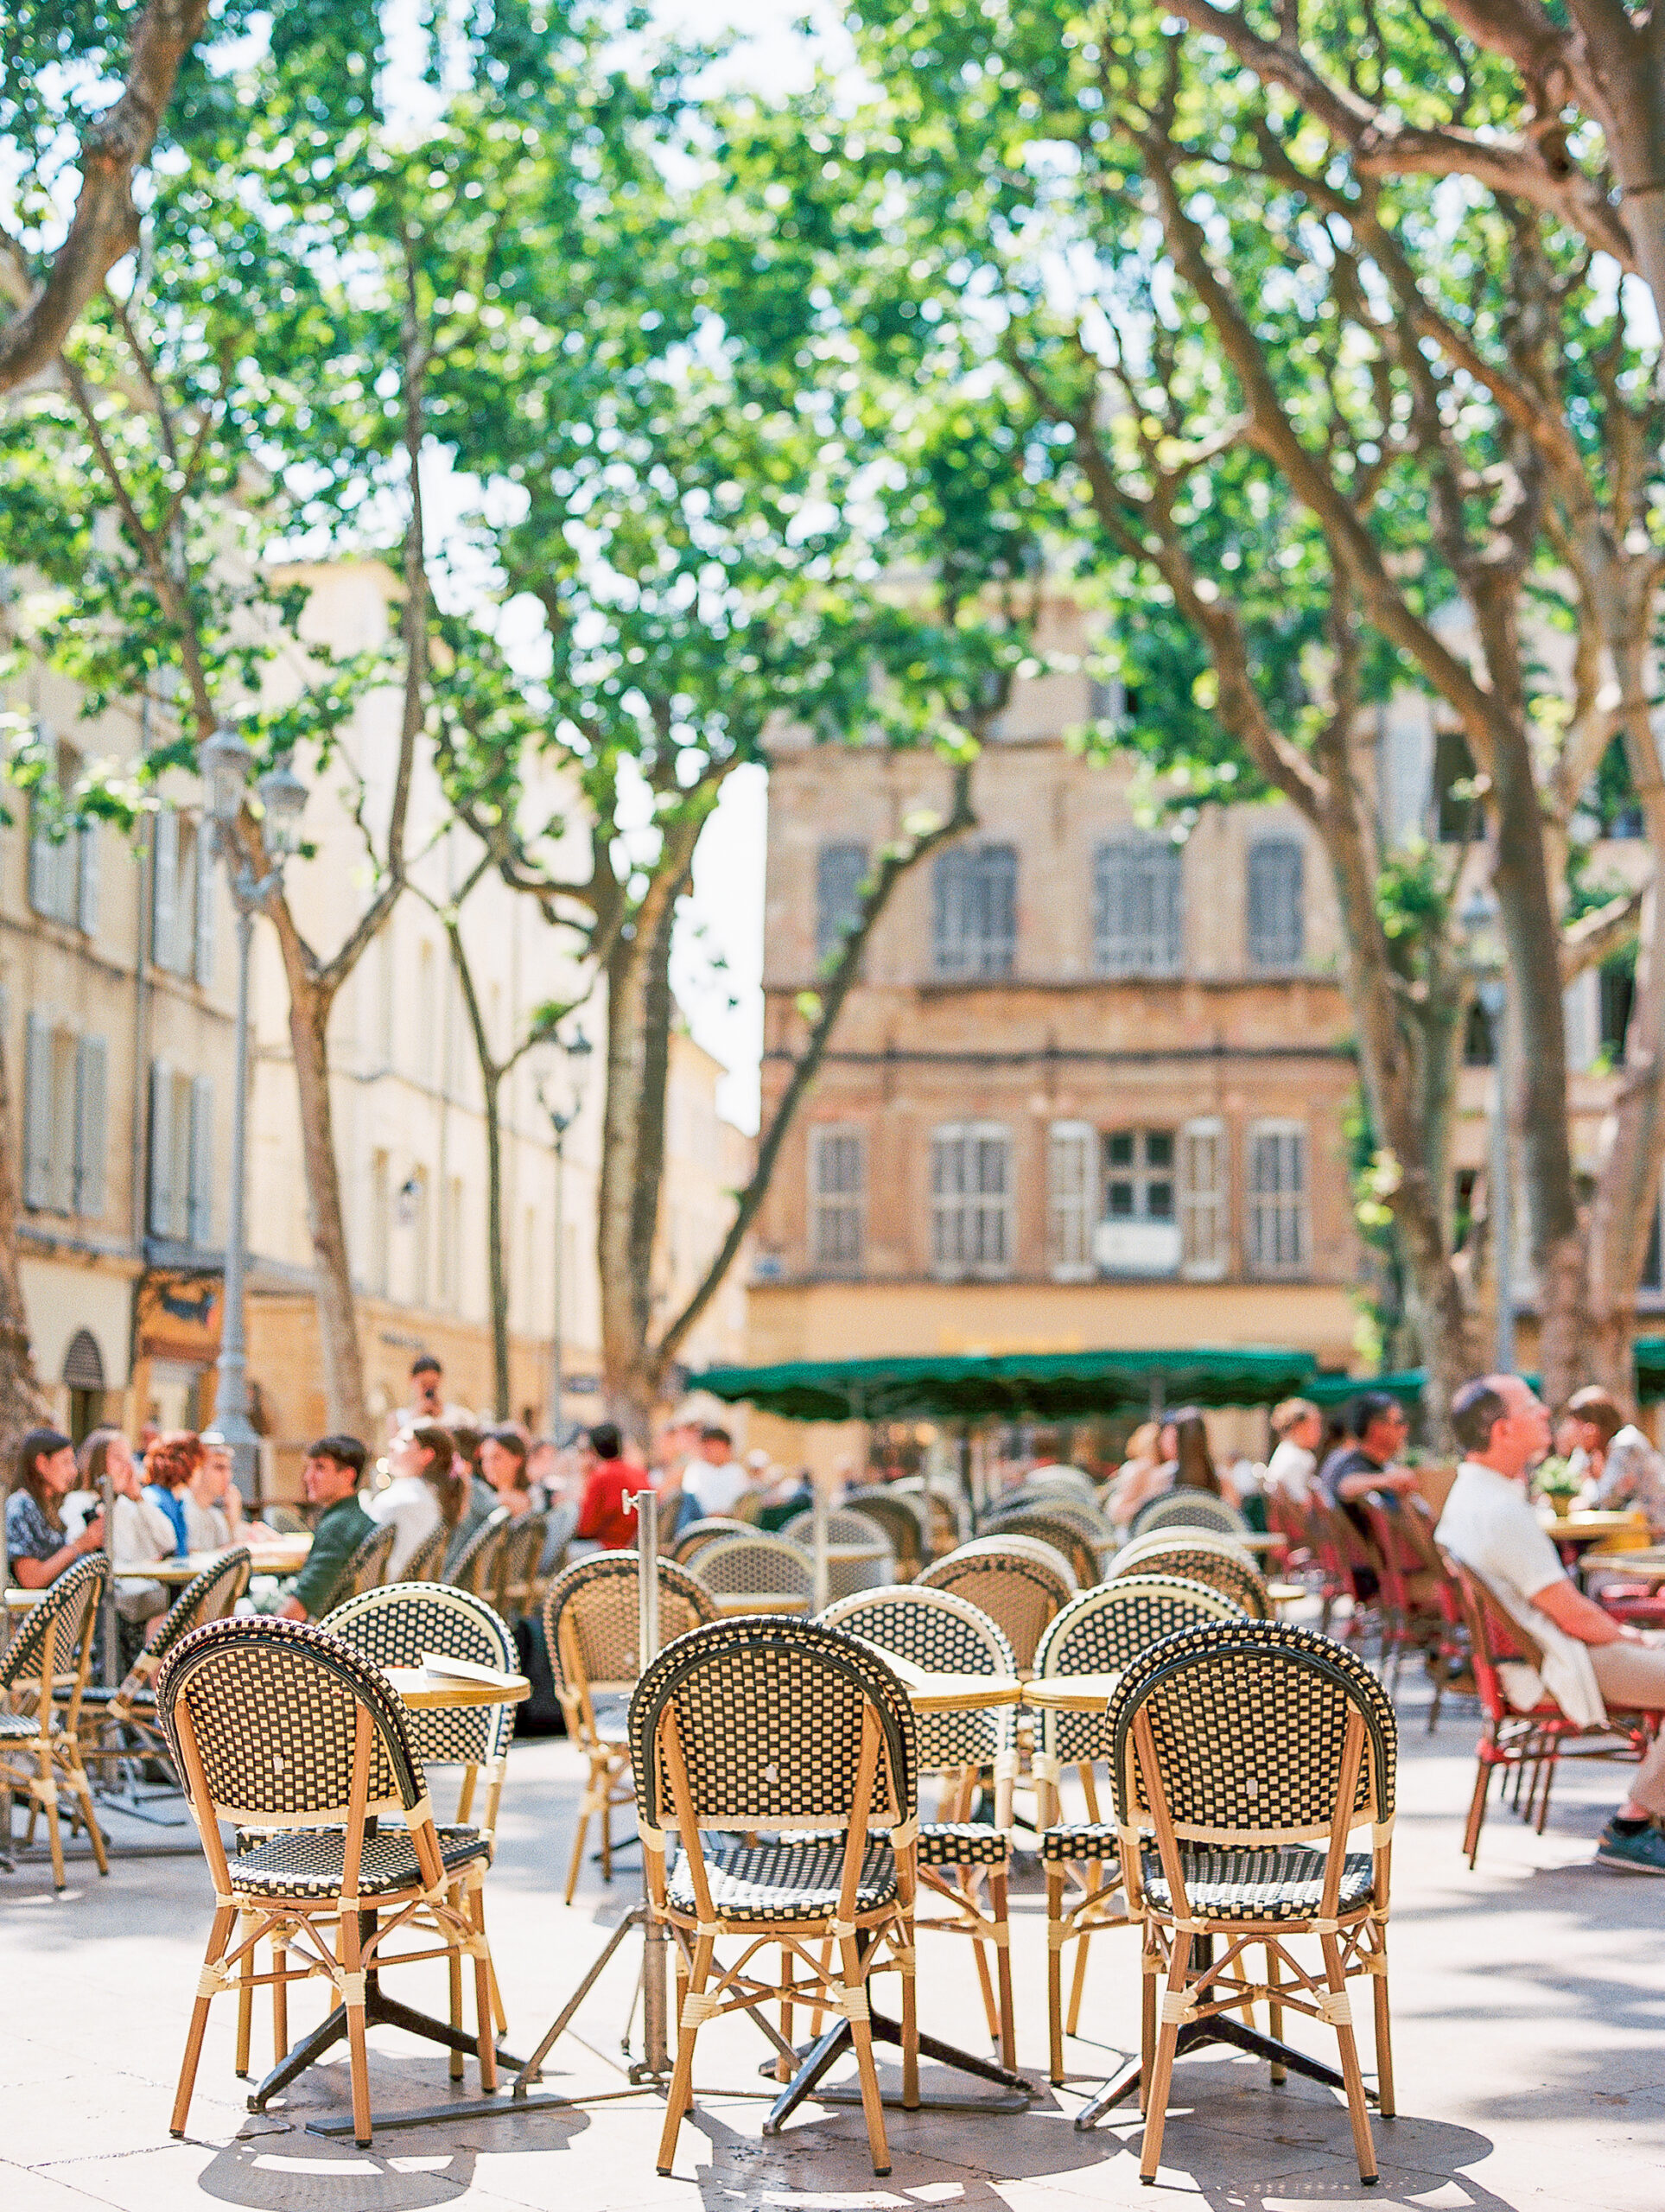 summer in provence sun soaked market square in aix-en-provence with rattan chairs and people lounging under shady trees